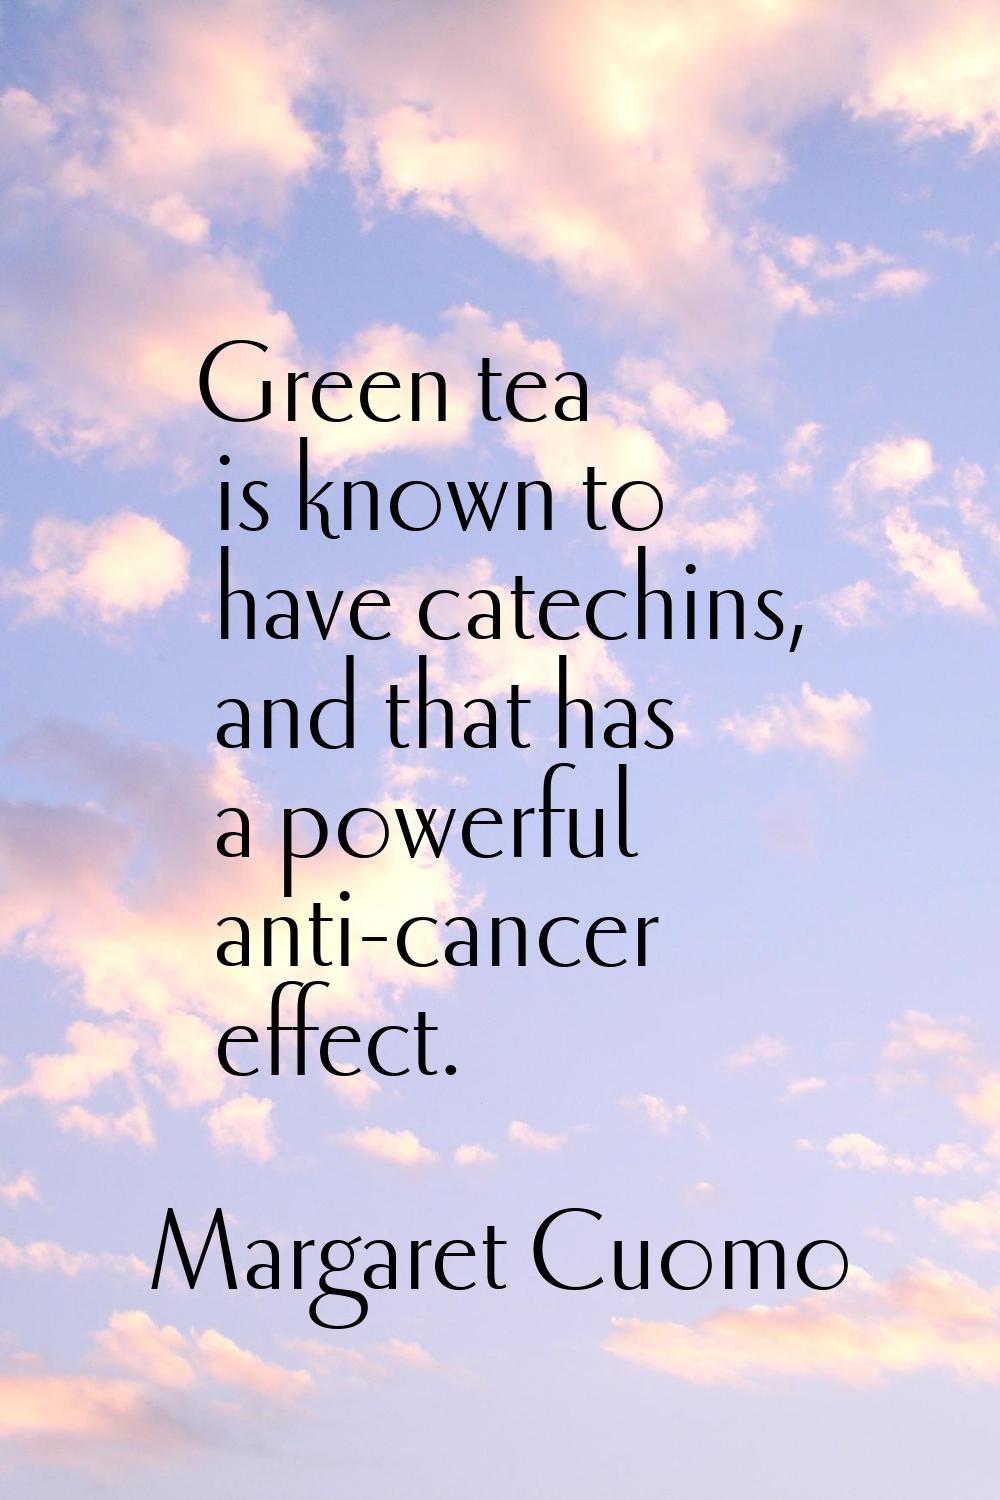 Green tea is known to have catechins, and that has a powerful anti-cancer effect.